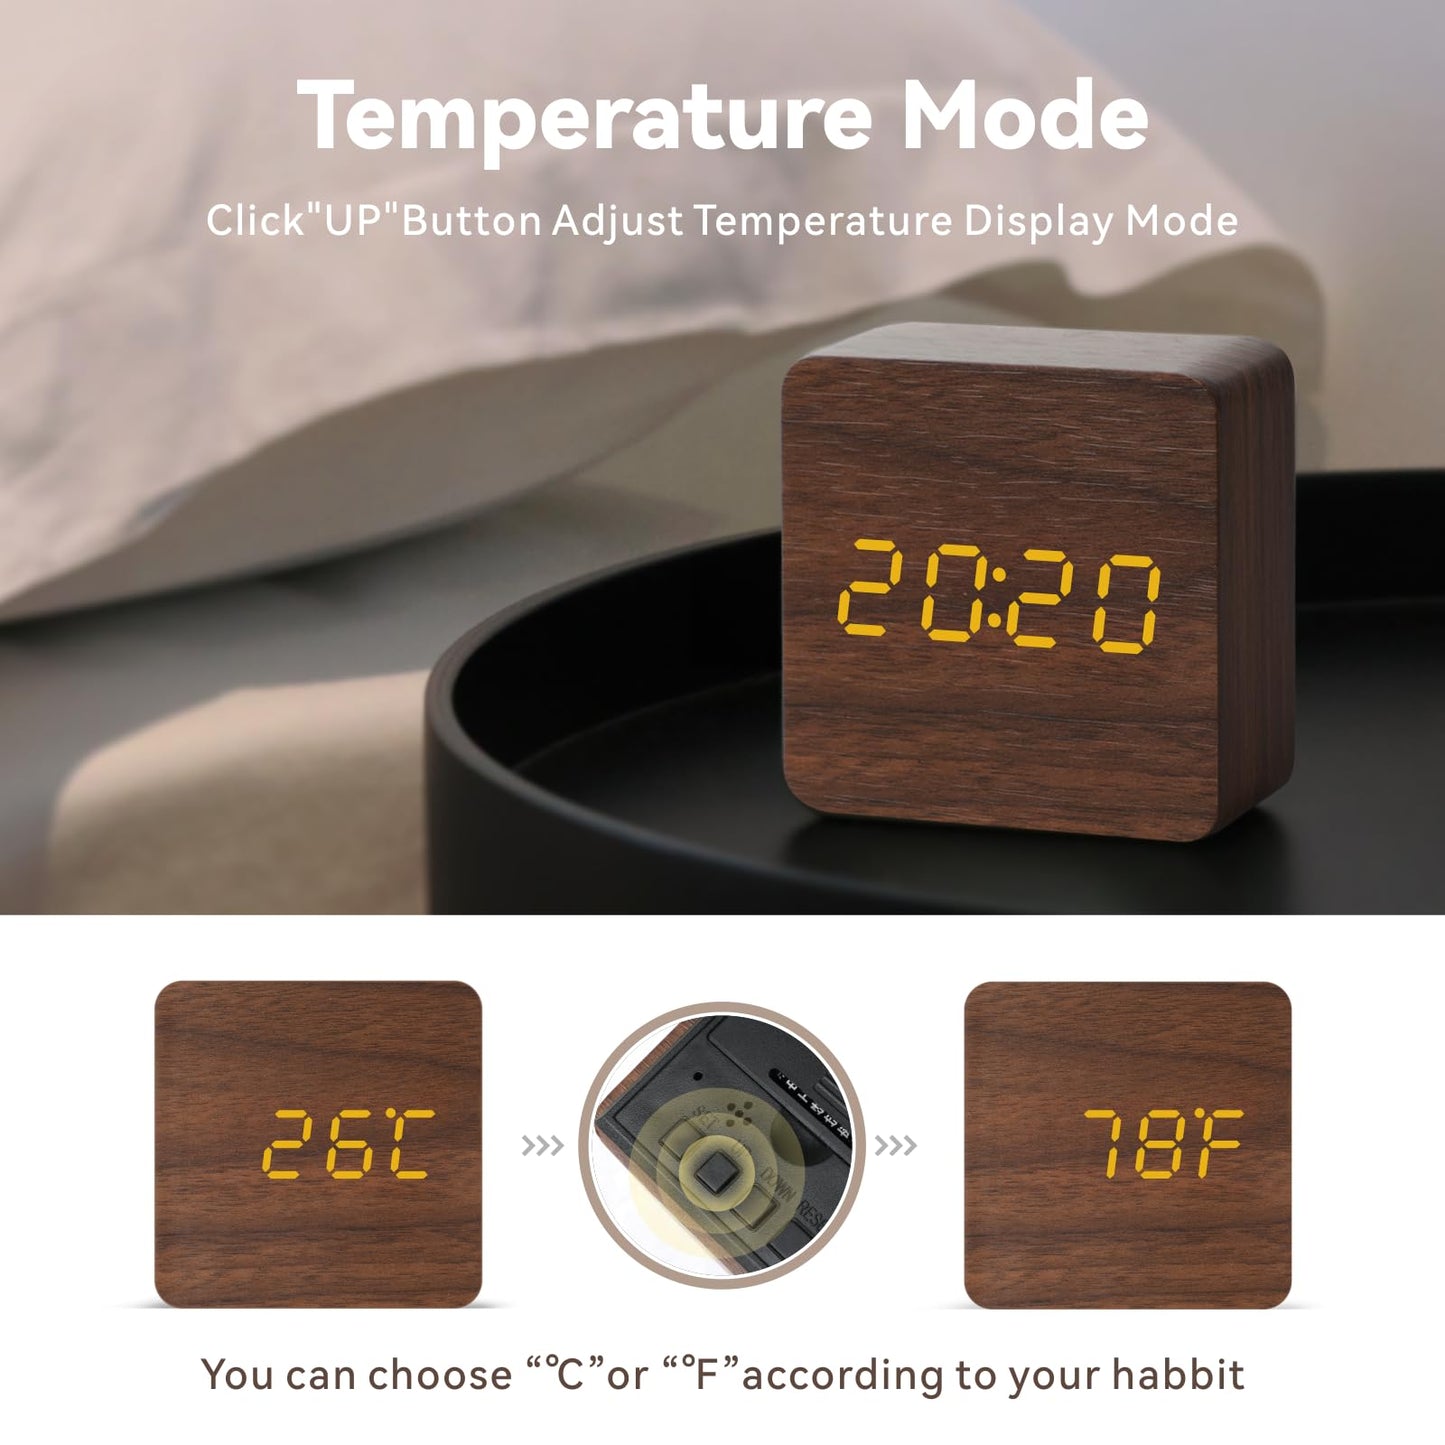 Baytion LED Digital Alarm Clock,Mini Square Table Clock with 3 Group of Alarm Settings,Temperature, Date Display Bedside Clock Support USB Cable and Battery Power for Bedroom, Beside,Kitchen(Brown)